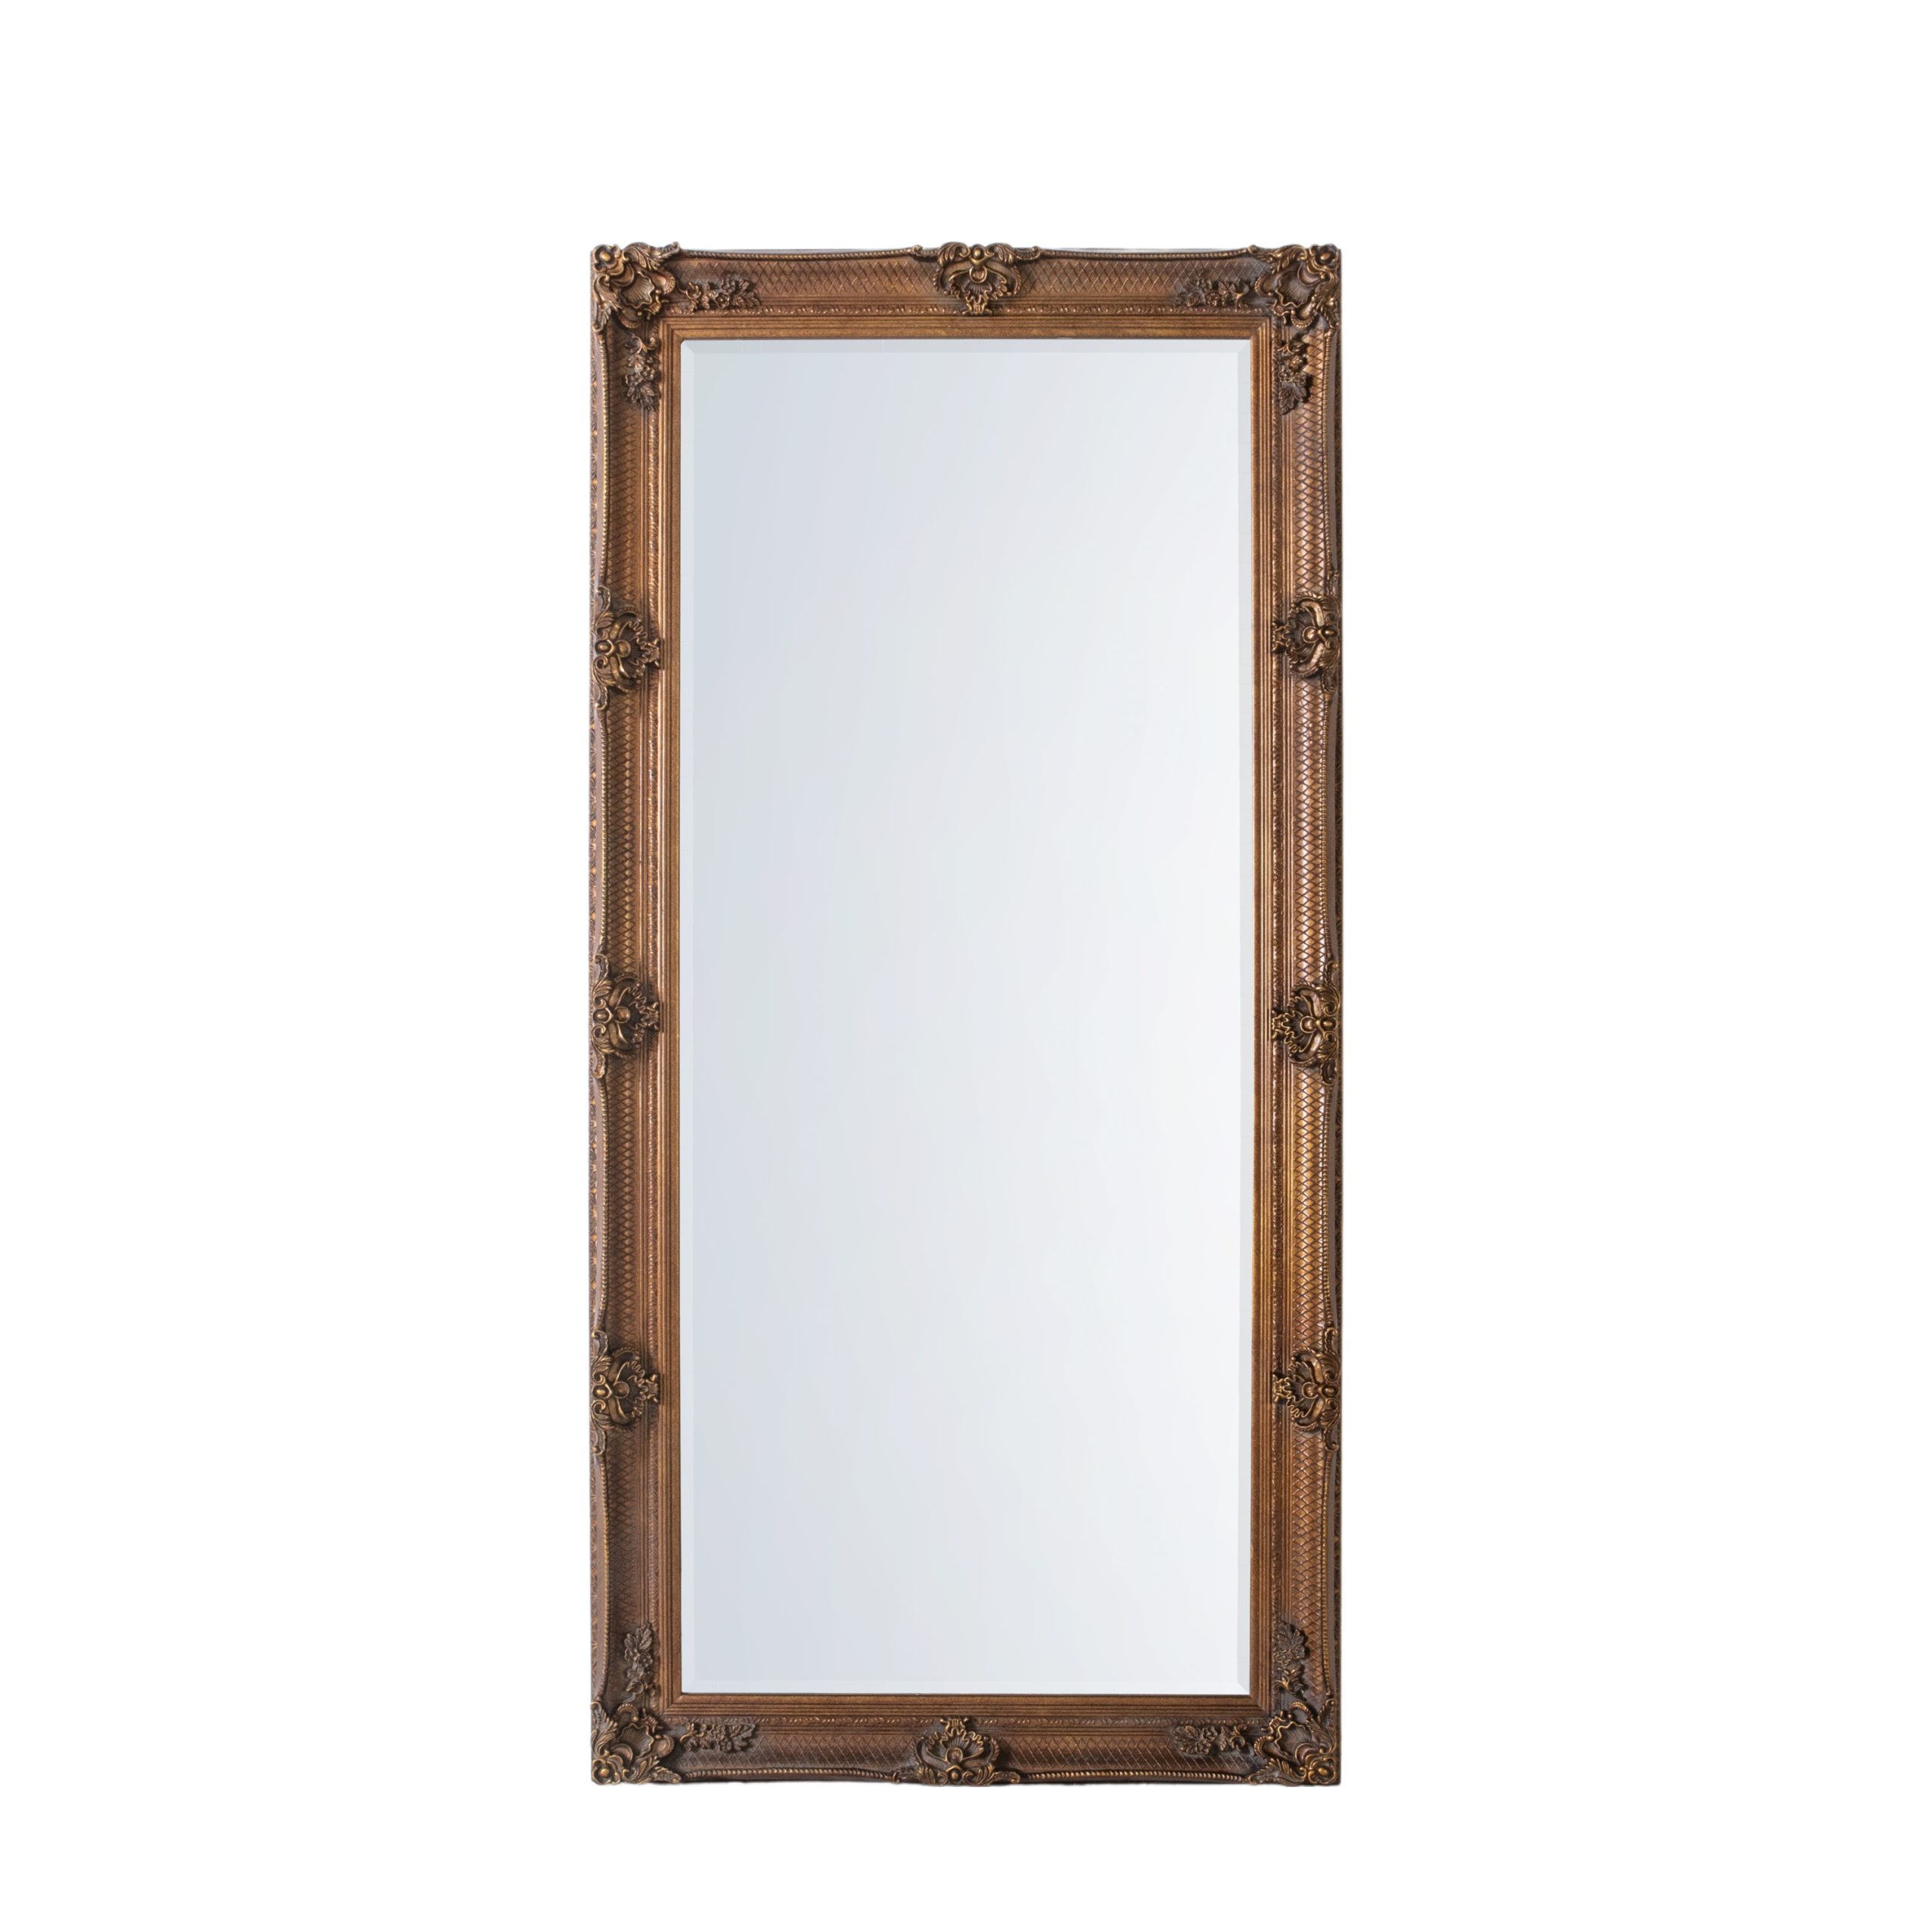 Gallery Direct Abbey Leaner Mirror Gold